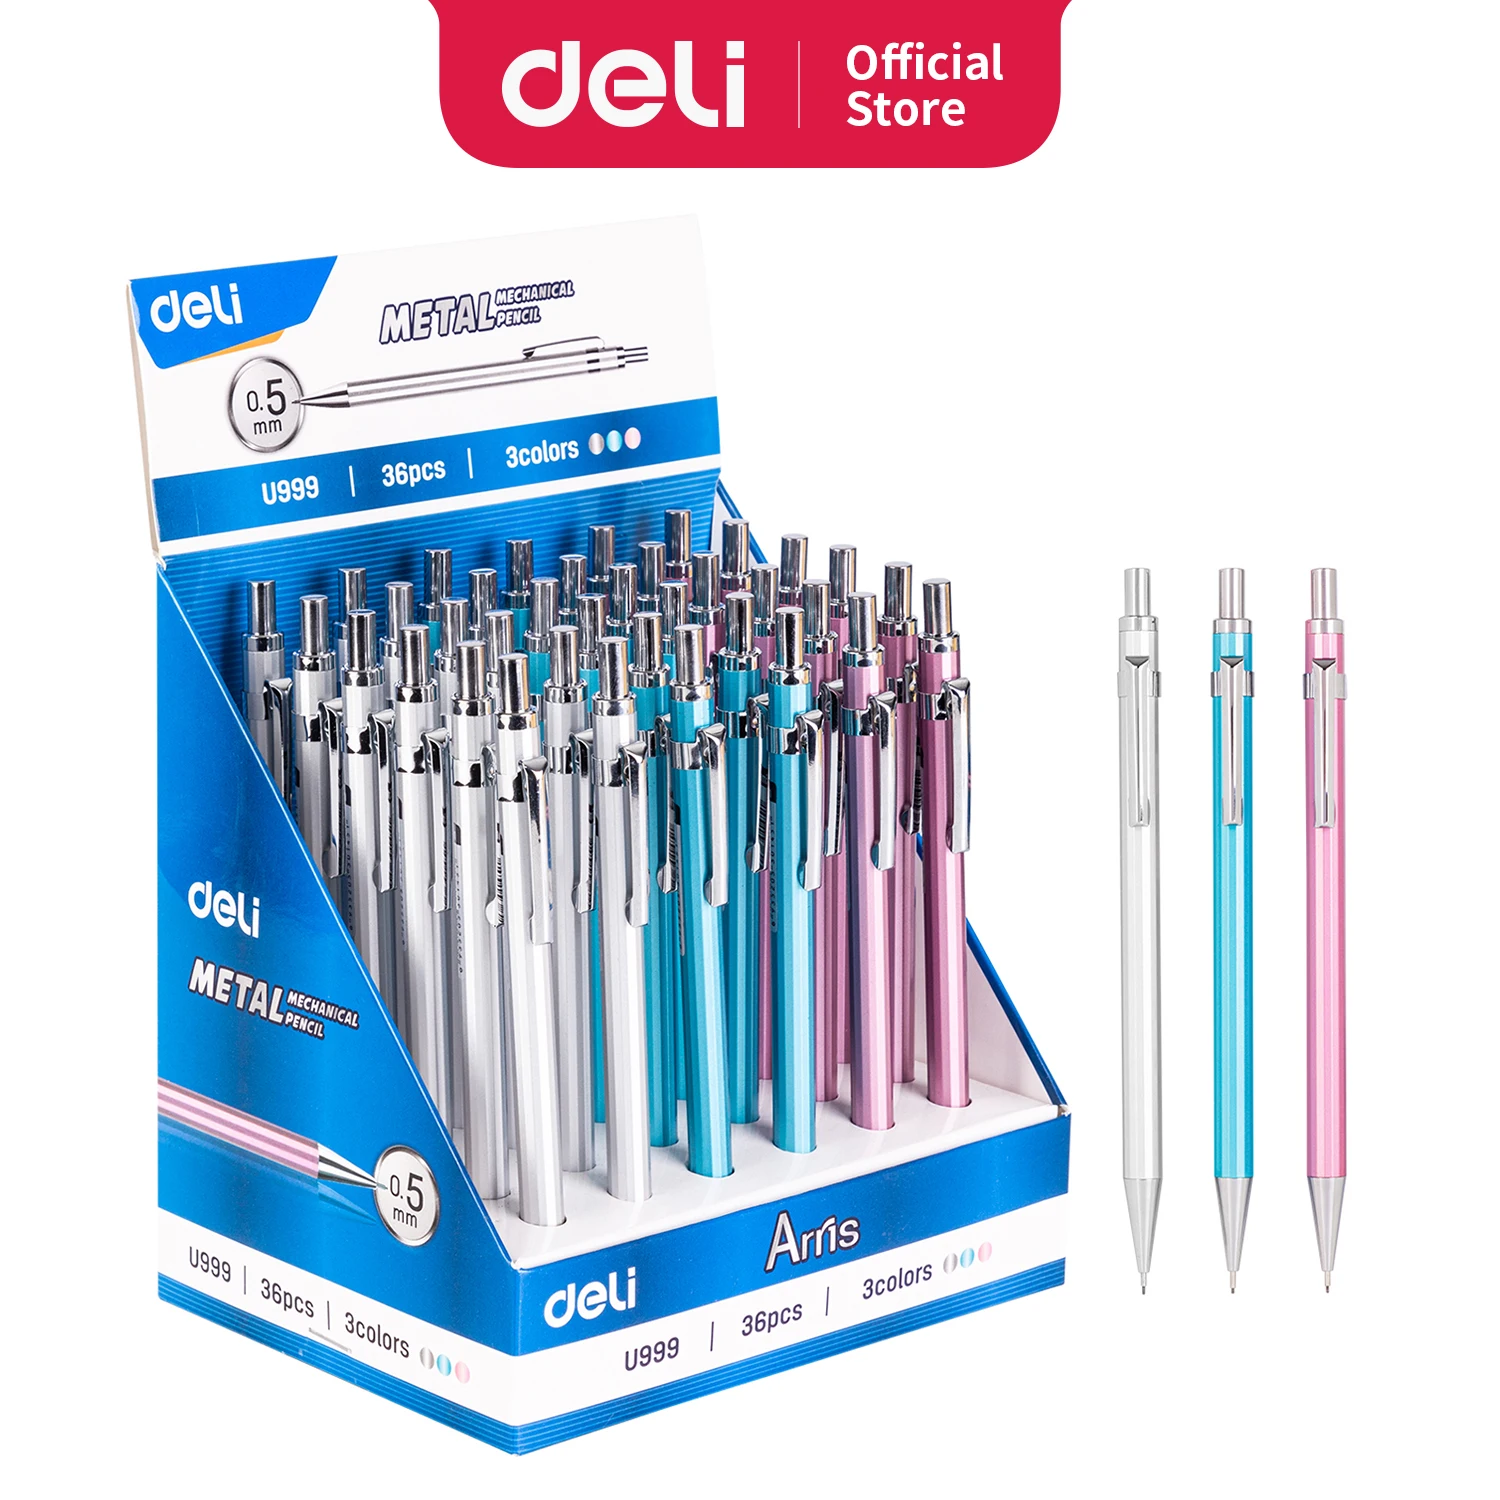 30pcs box deli hc135 hb pencils school office stationery gift student supplies Deli Metal Mechanical Pencil 0.5mm 0.7mm with Lead Retractable Black Lead Pencils Stationery School Supplies Art Sketch Writing